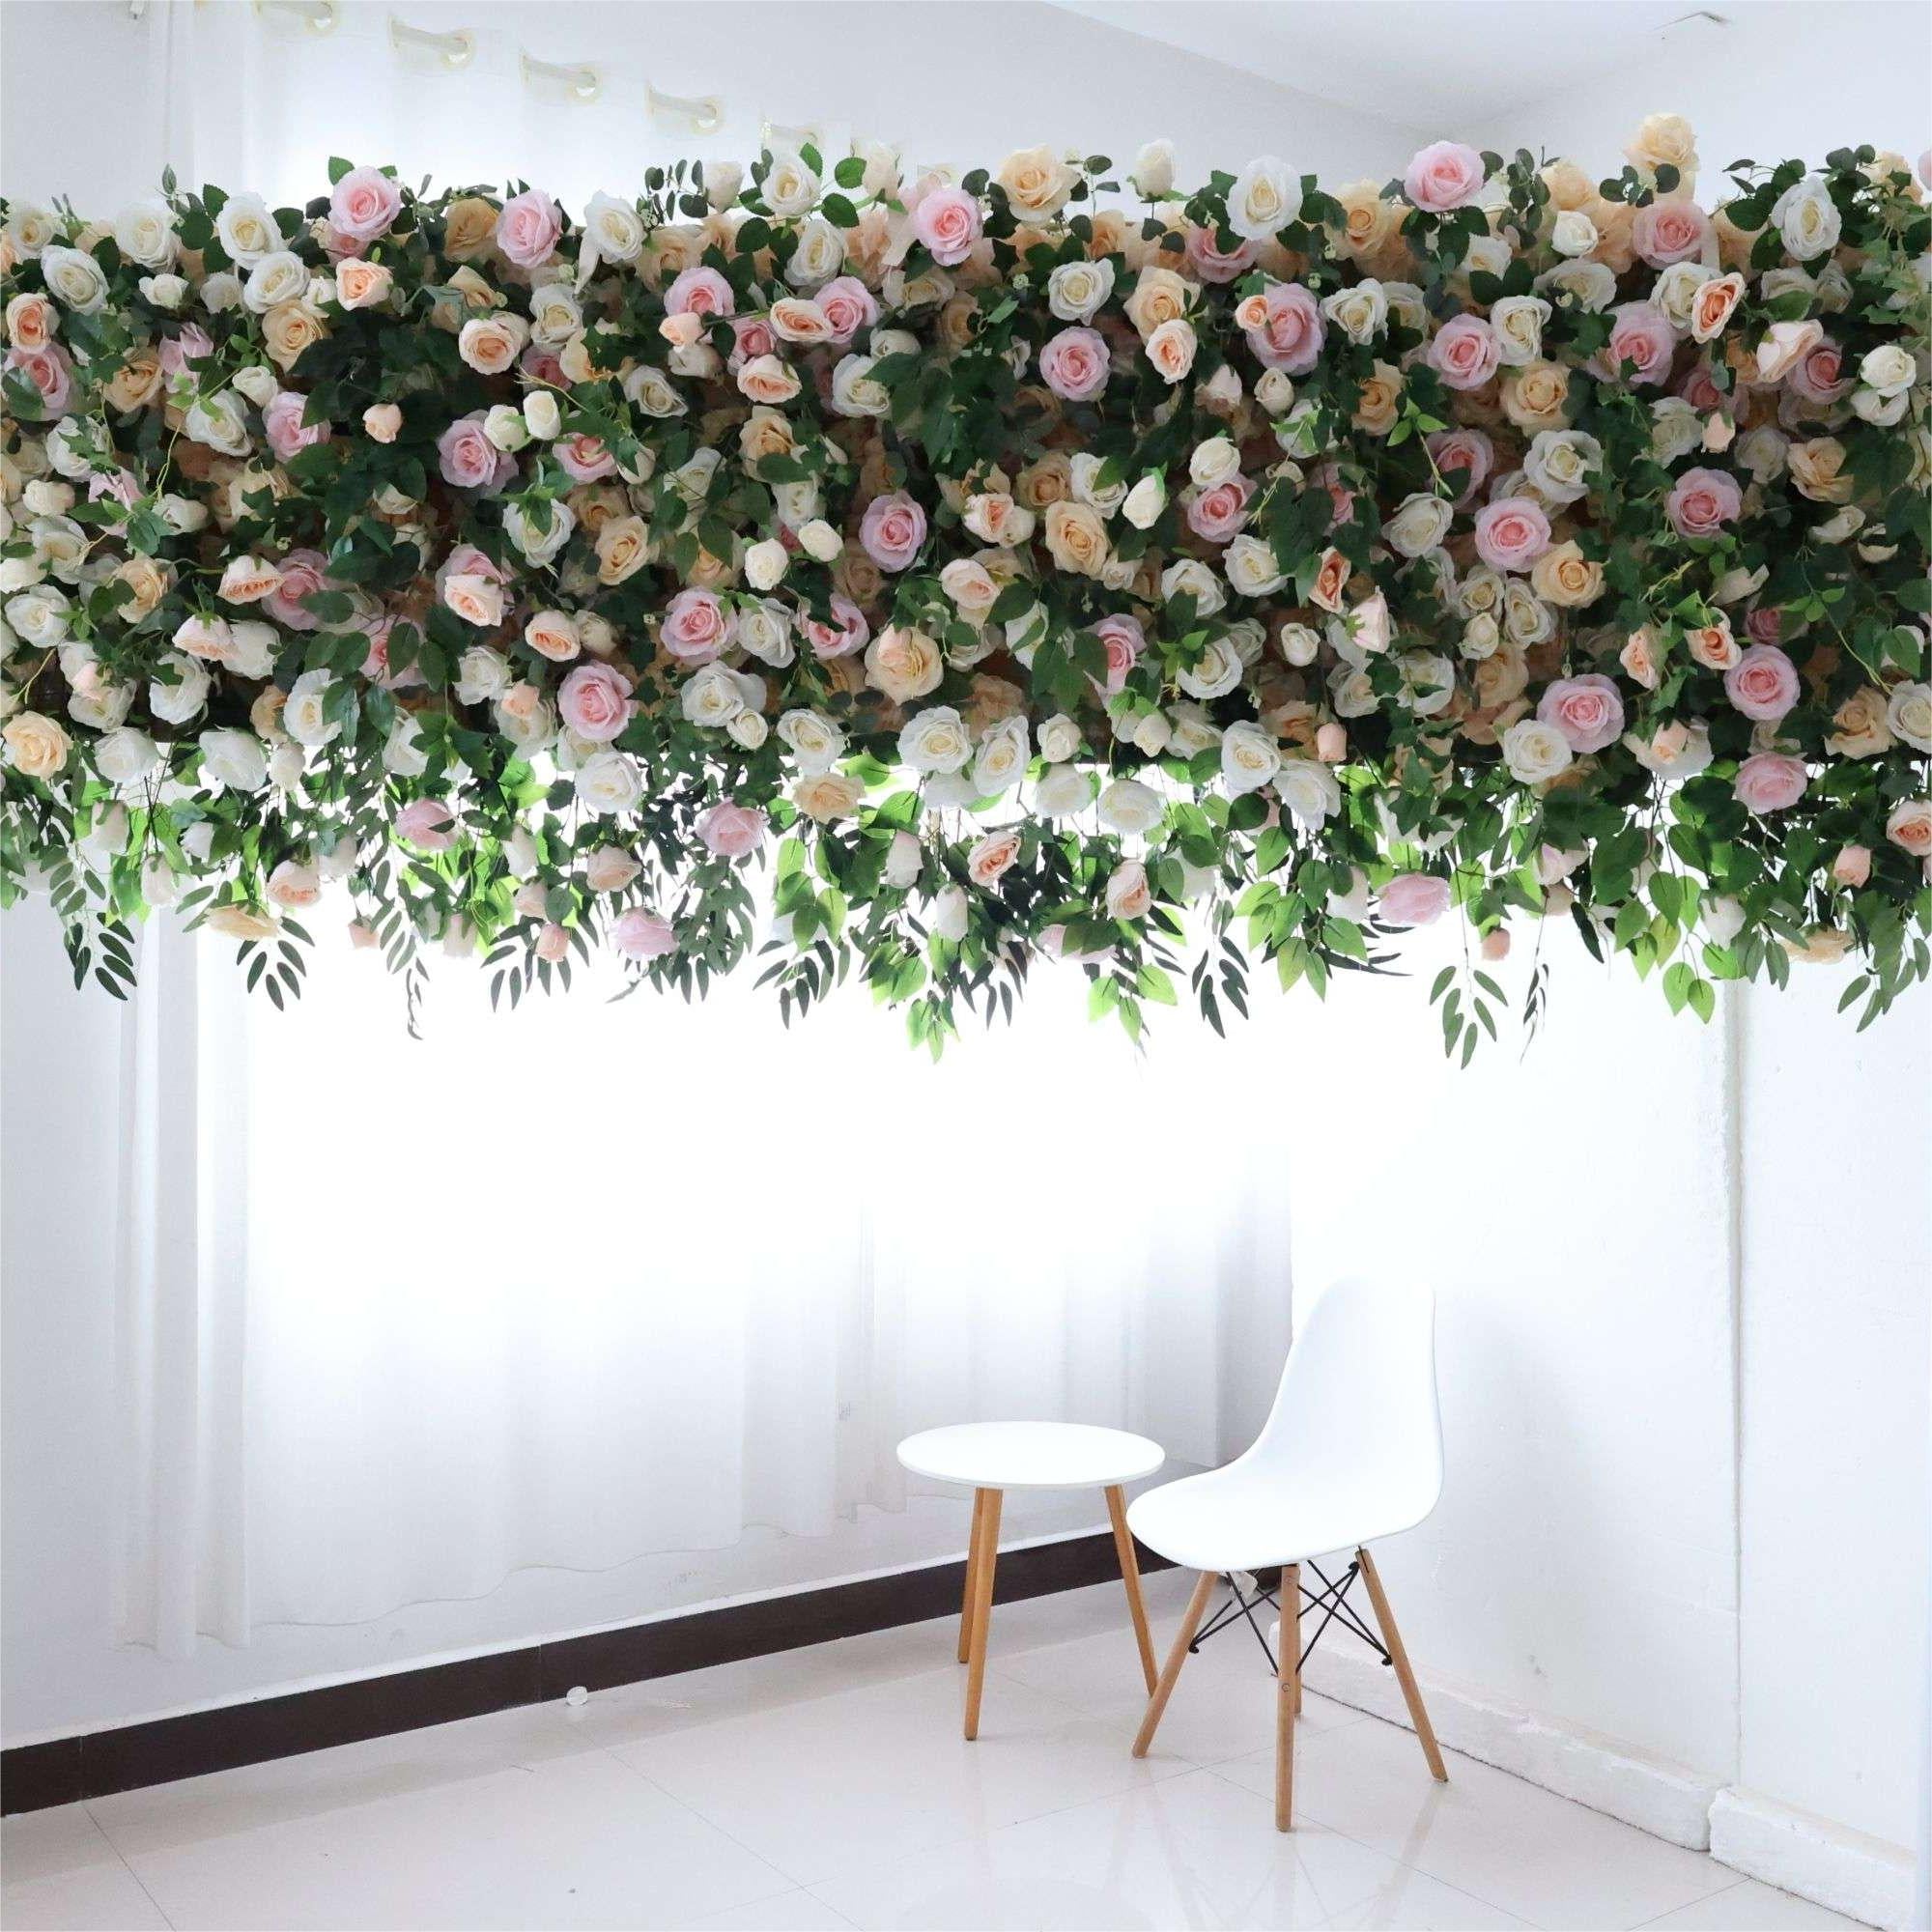 Flower Wall Green Pink Florals Cover Wedding Party Proposal Decor